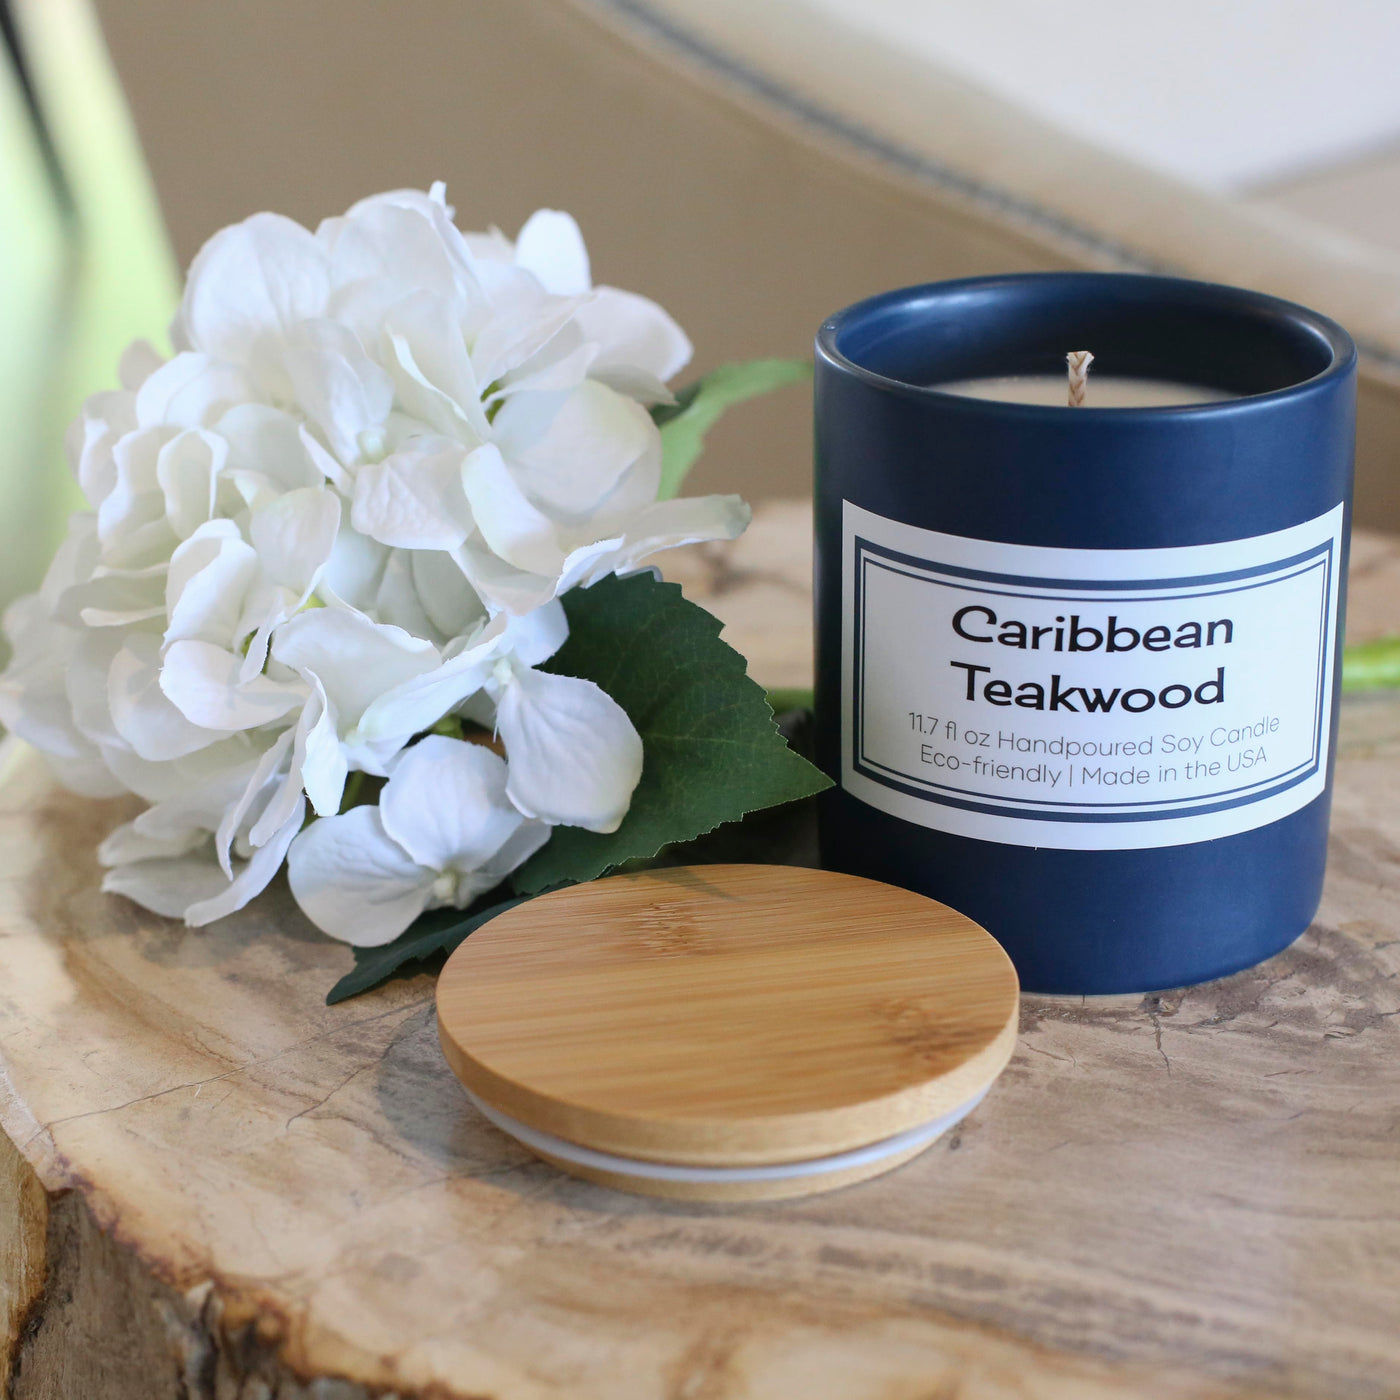 caribbean teakwood mid century modern masculine slate blue matte vessel hand poured eco friendly soy candle. Made in the USA